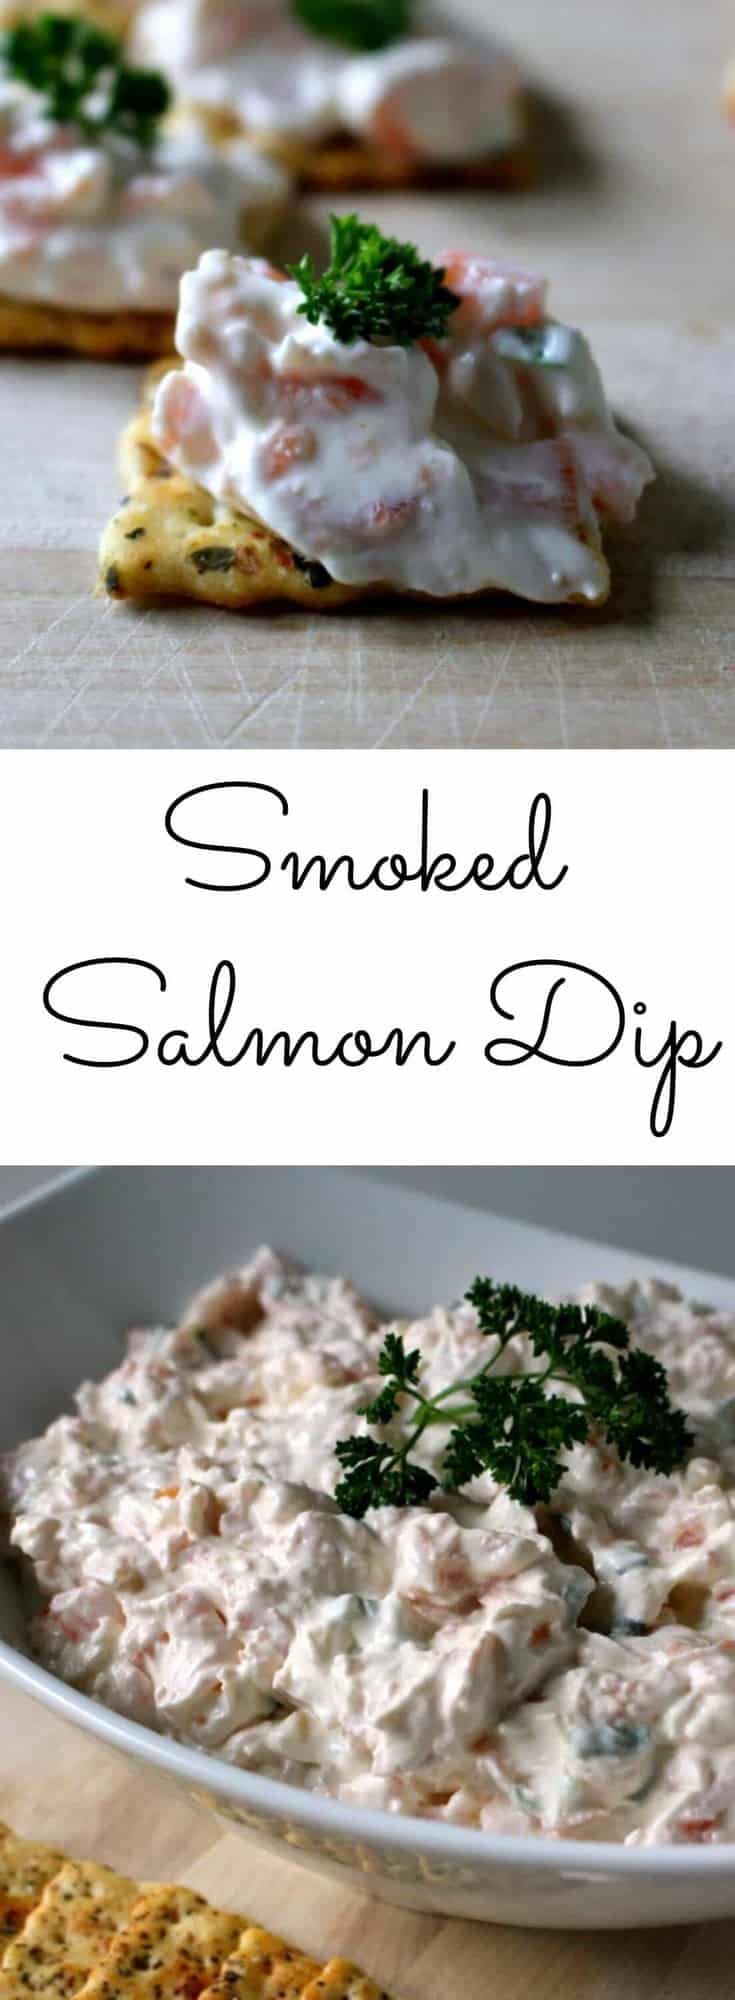 Smoked Salmon Dip - an easy appetizer